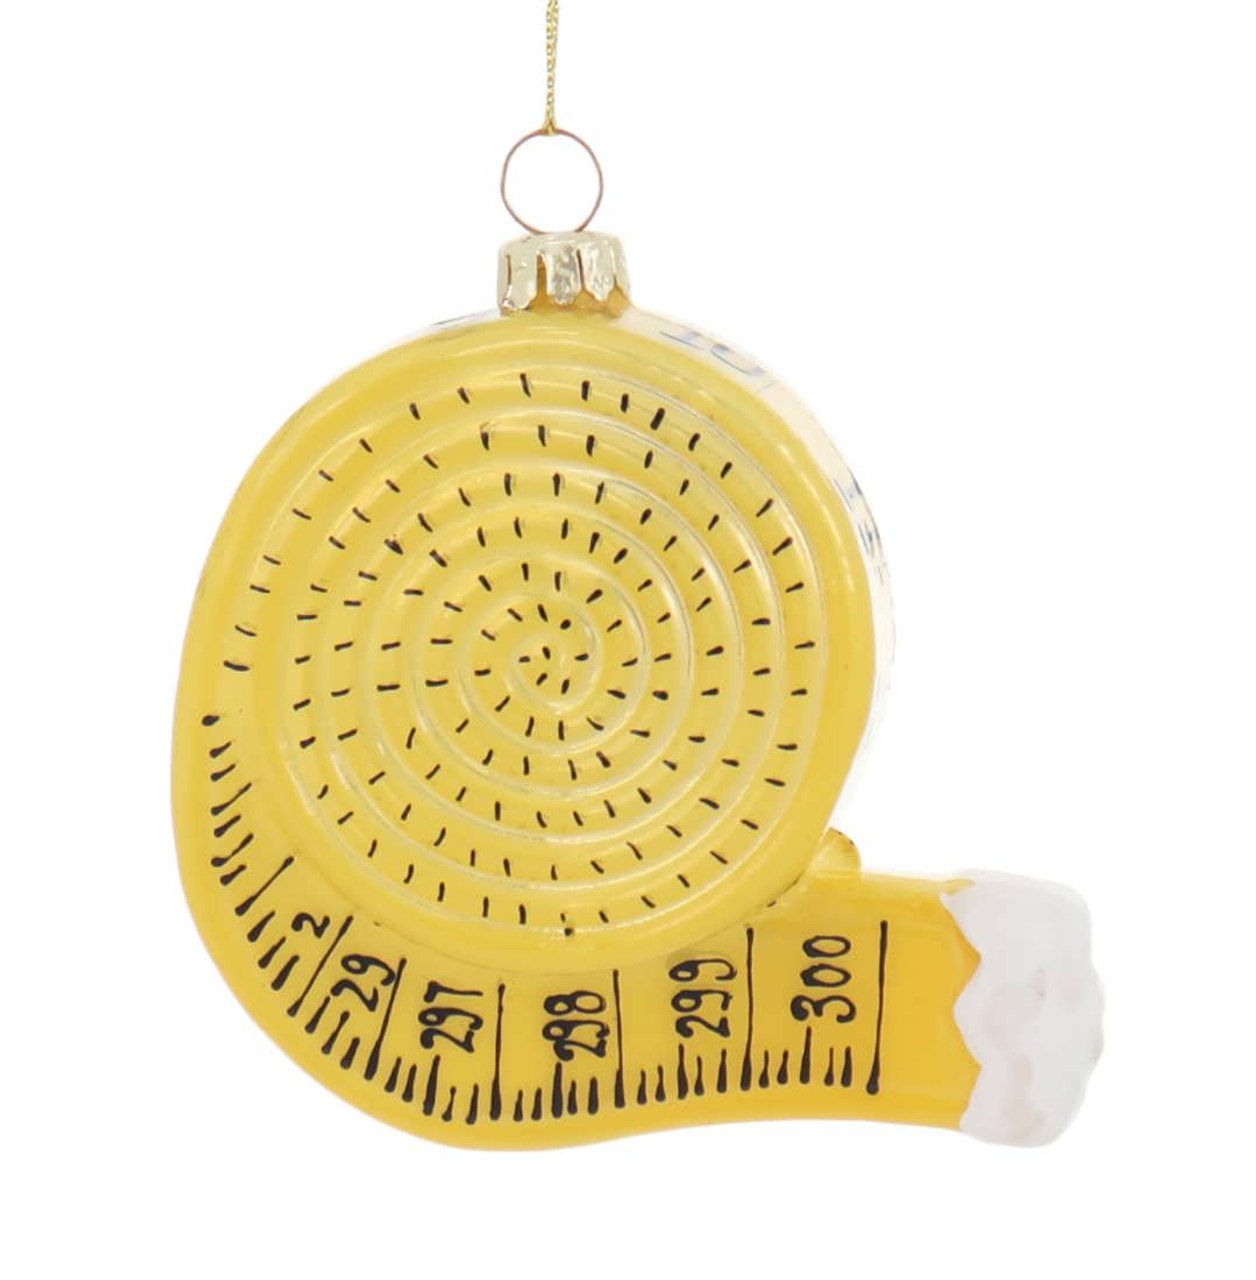 Measuring Tape Ornament  Hobby Ornaments – Callisters Christmas